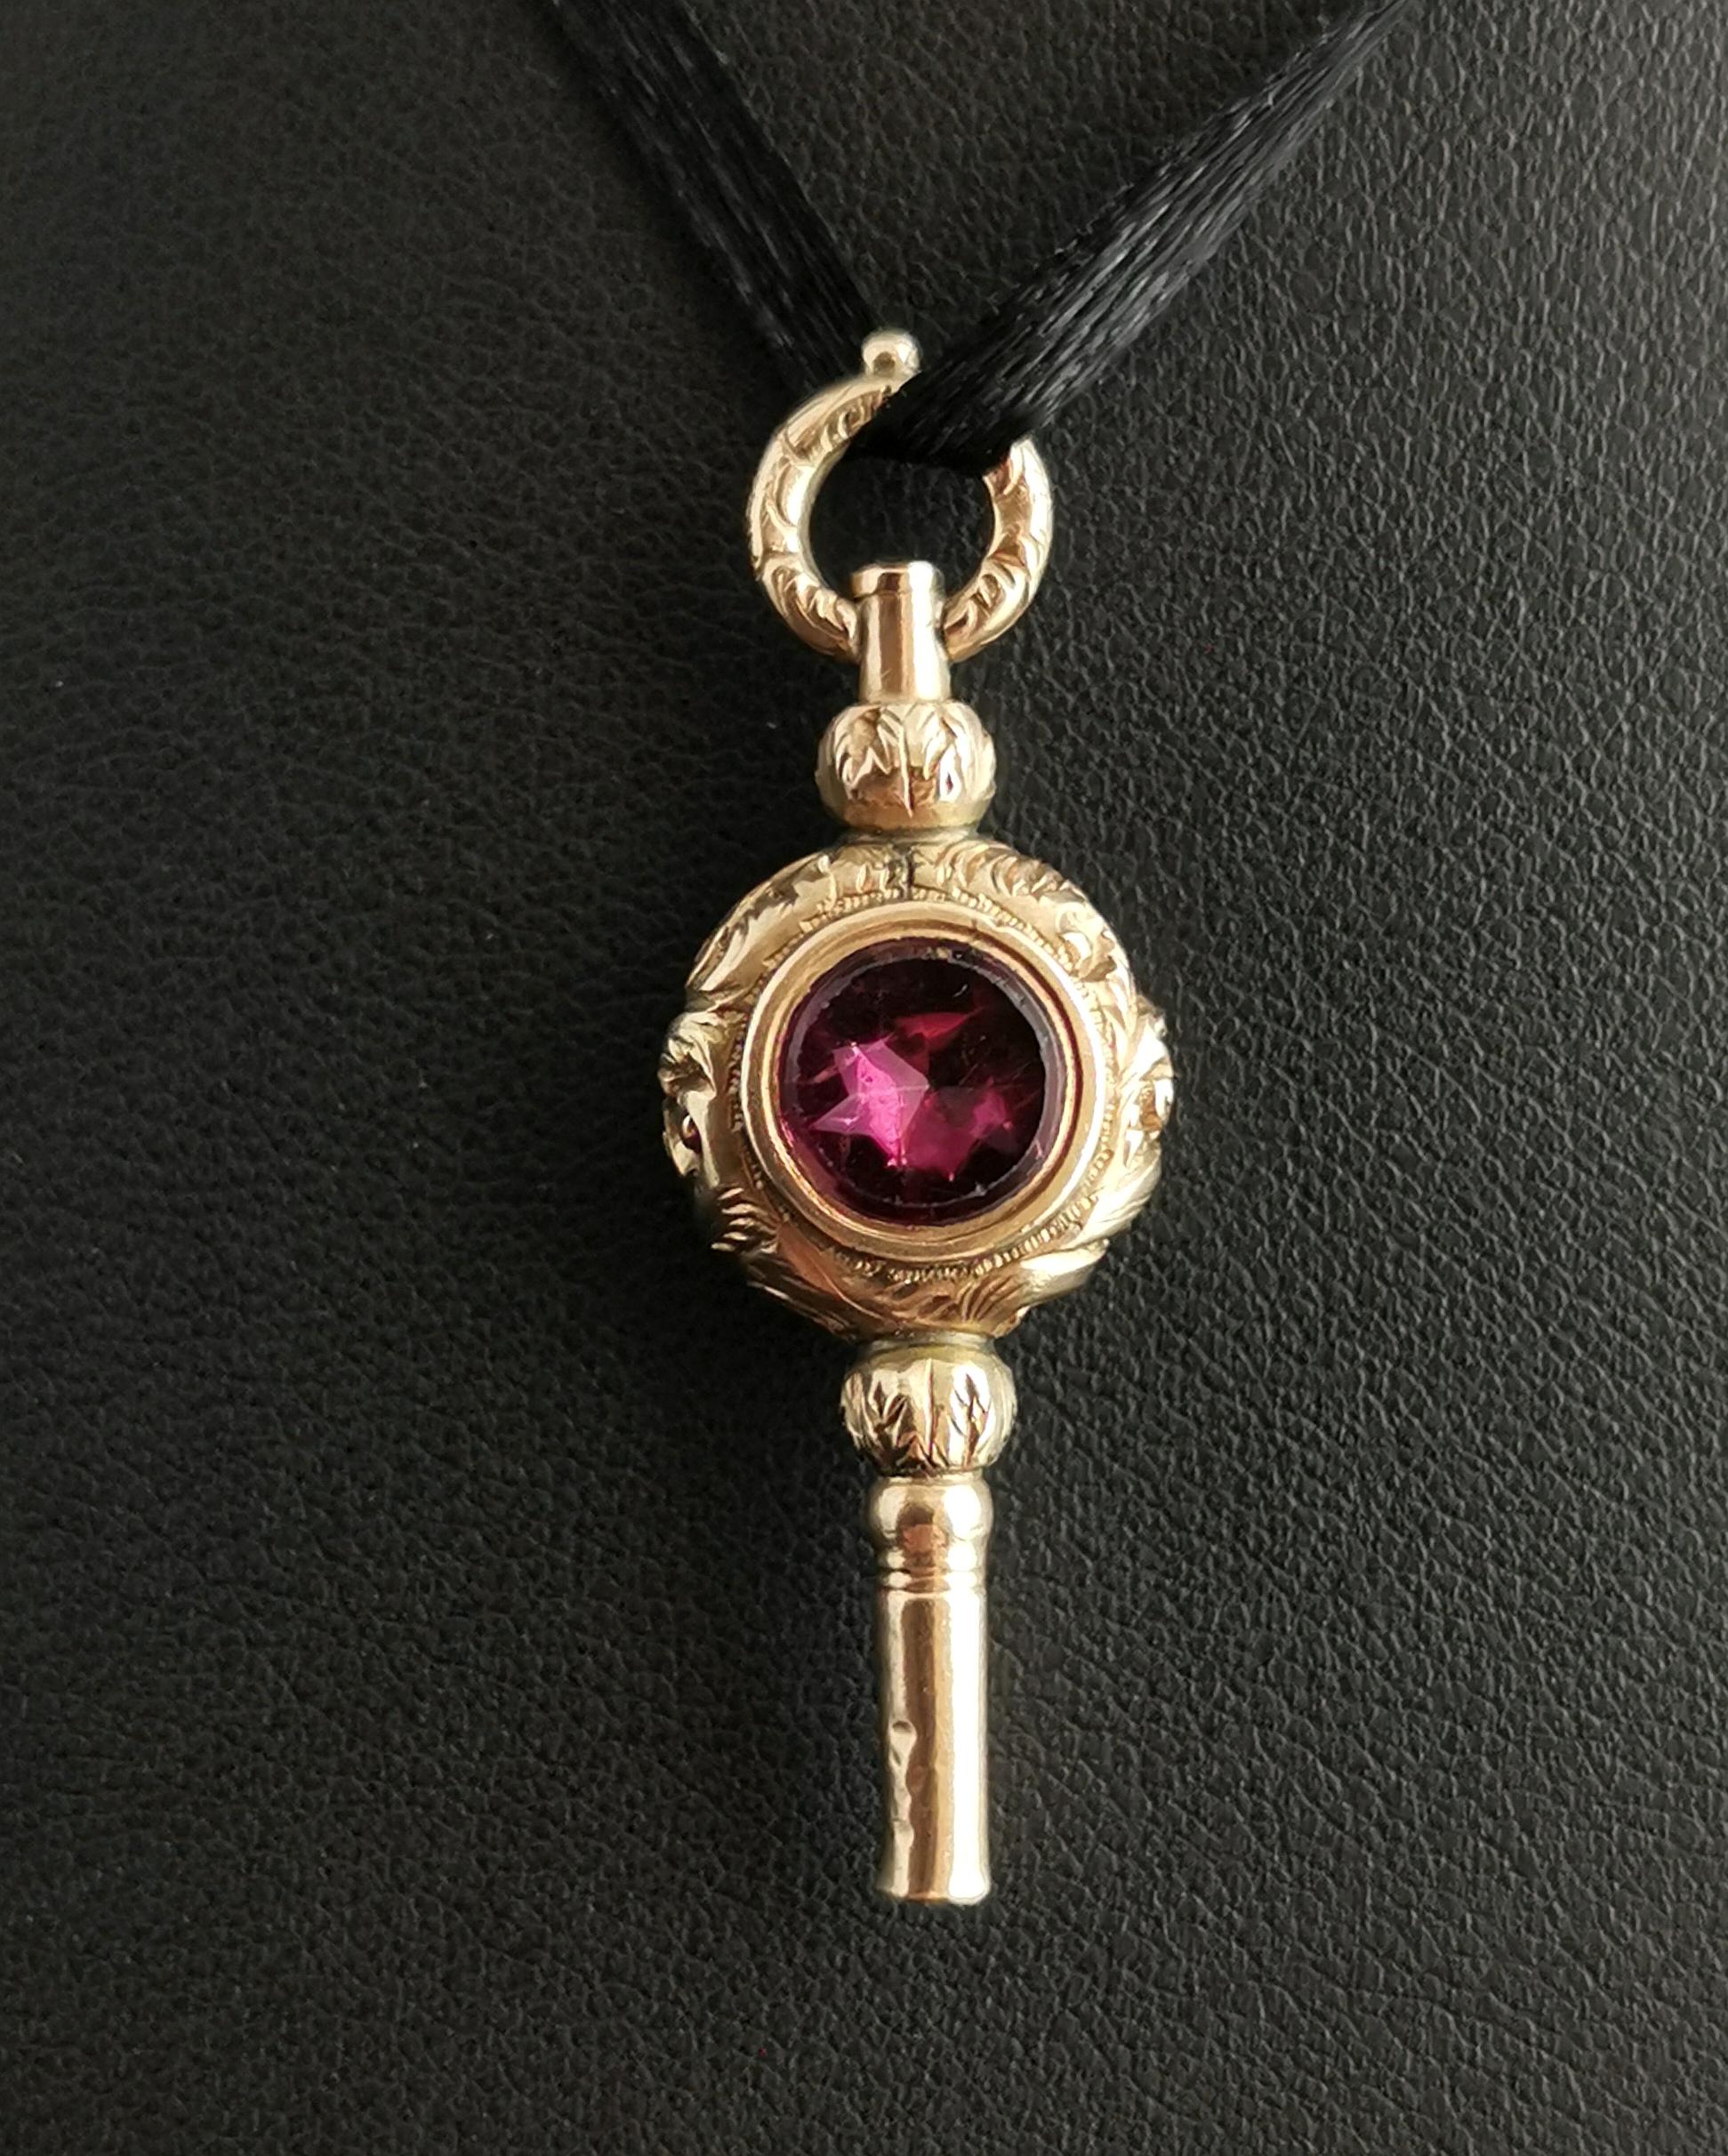 A beautiful antique late Georgian 9kt yellow gold watch key.

The key is cased in chased and engraved 9kt gold with a round flat cut gemstone to the front and back.

It is a larger sized watch key and makes a wonderful and interesting pendant, it is